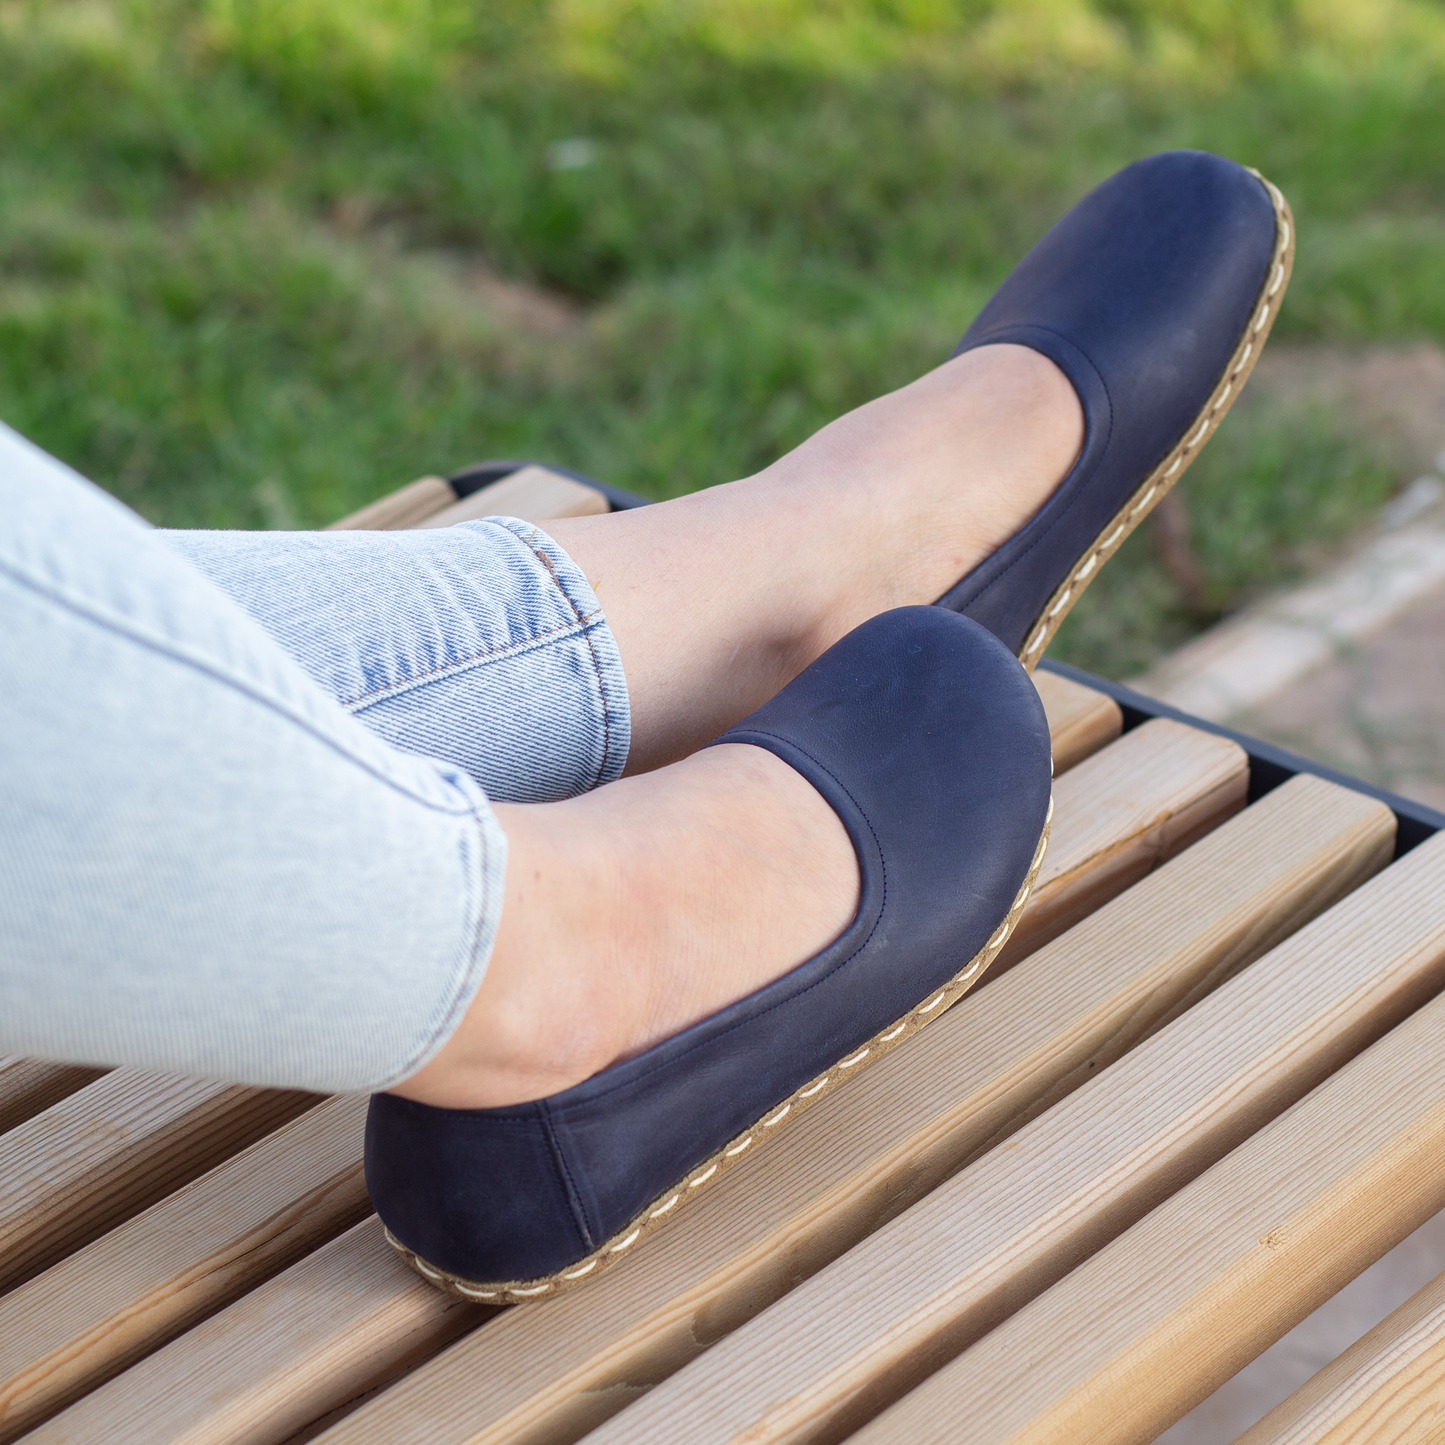 Leatherful Shoes | Grounded Shoe | Barefoot Shoes Women | Earthing Shoes | Handmadeshoes | Genuine Leather Shoes | Crazy Navy Blue